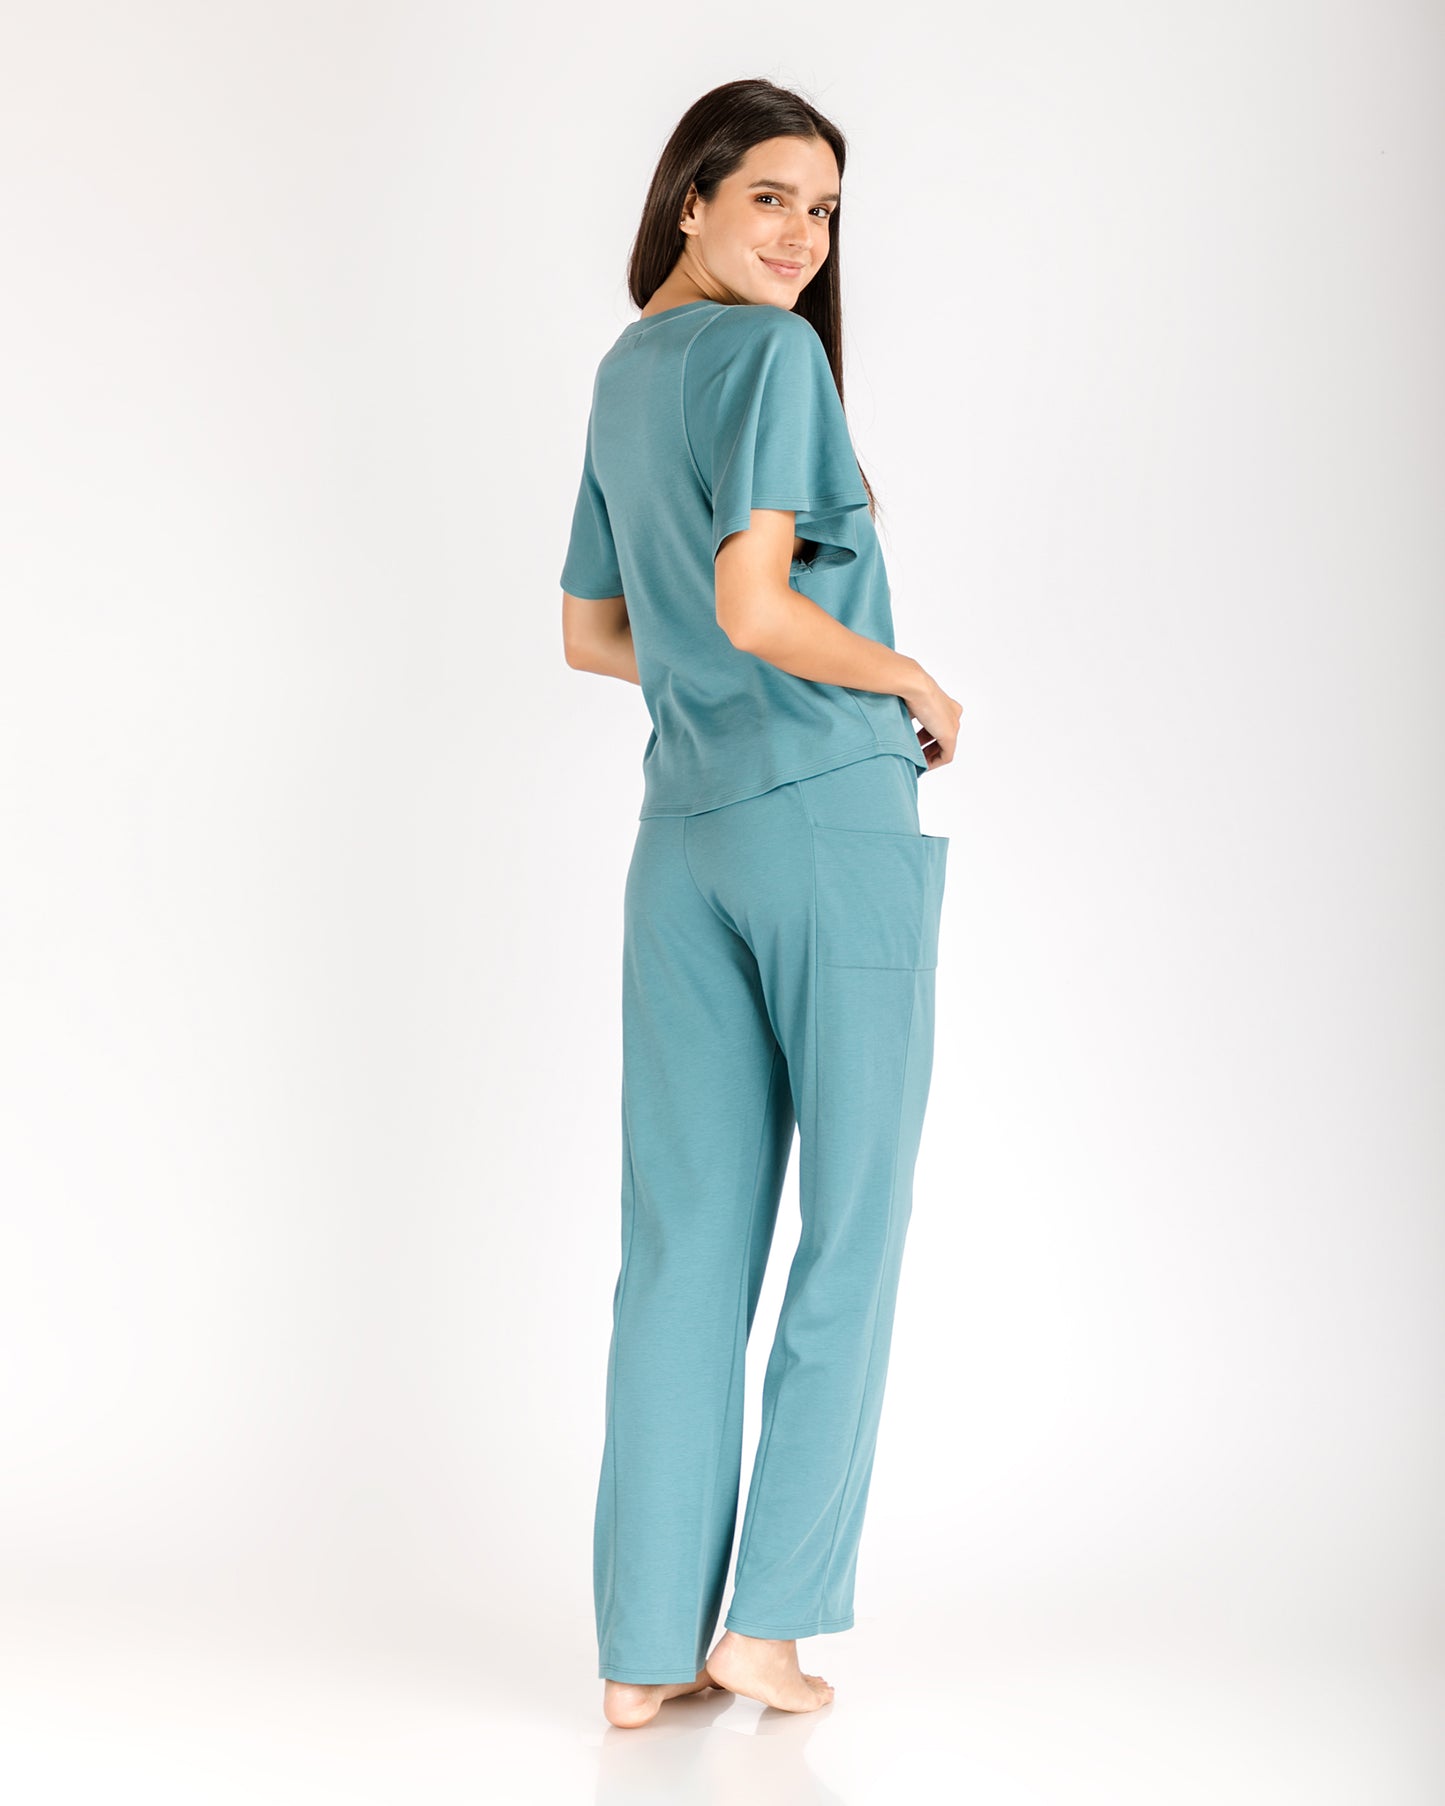 women_s-pajama-set-Straight-pant-with-pocket-detail-and-top-with-oversized-sleeves-storm blue-Lavender-Dreams